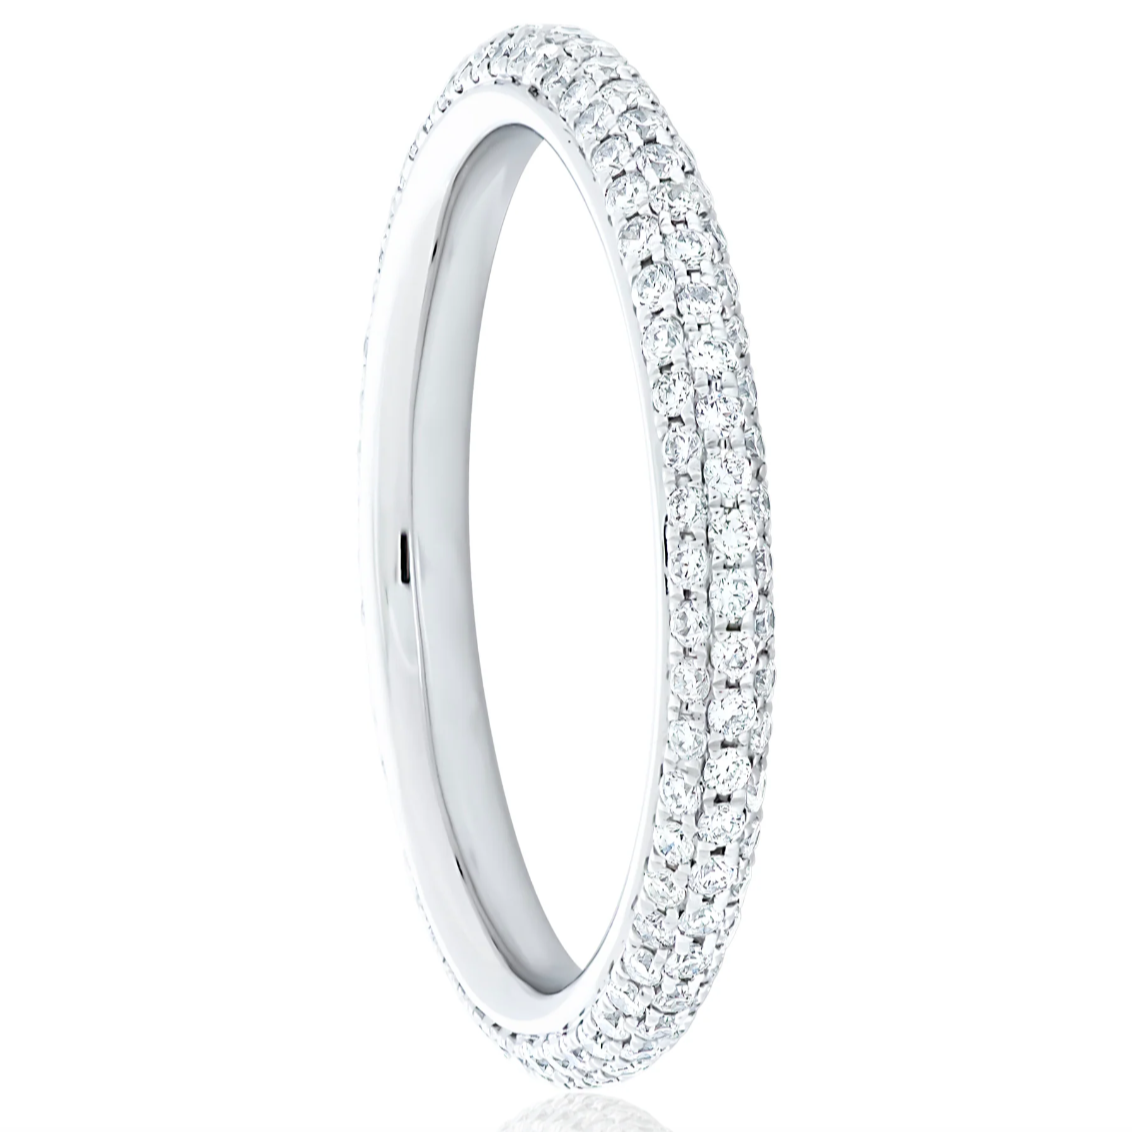 Frida Aasen 3 Row Micro Pave Eternity Band, 925 Sterling Silver by Margalit Rings side view